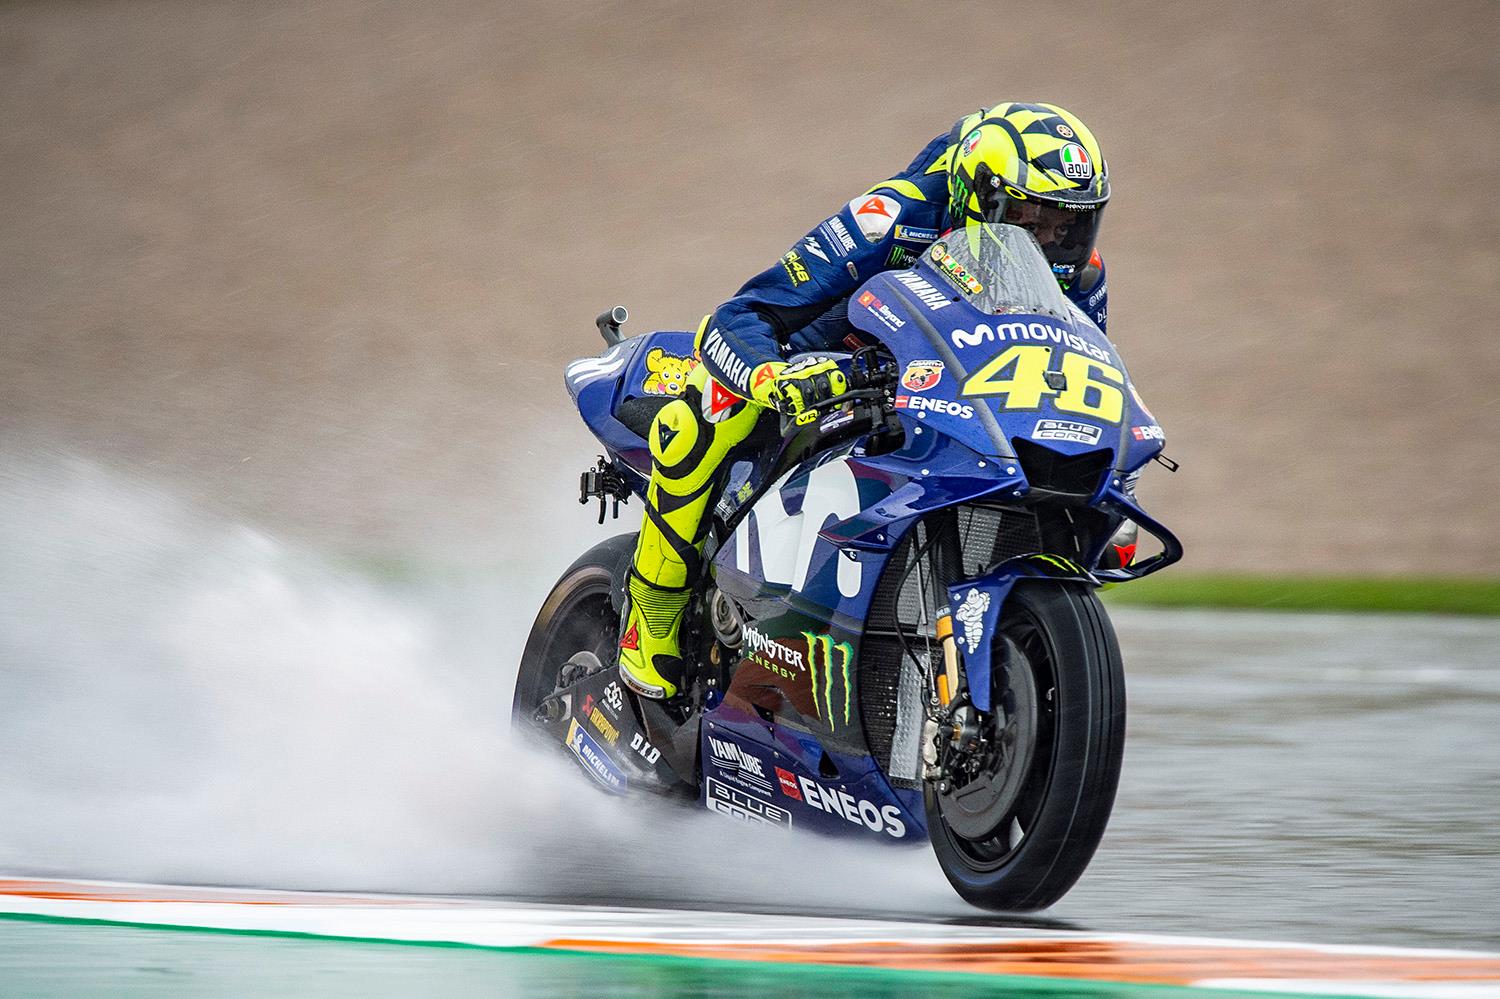 MotoGP Rider of the Year: 5th